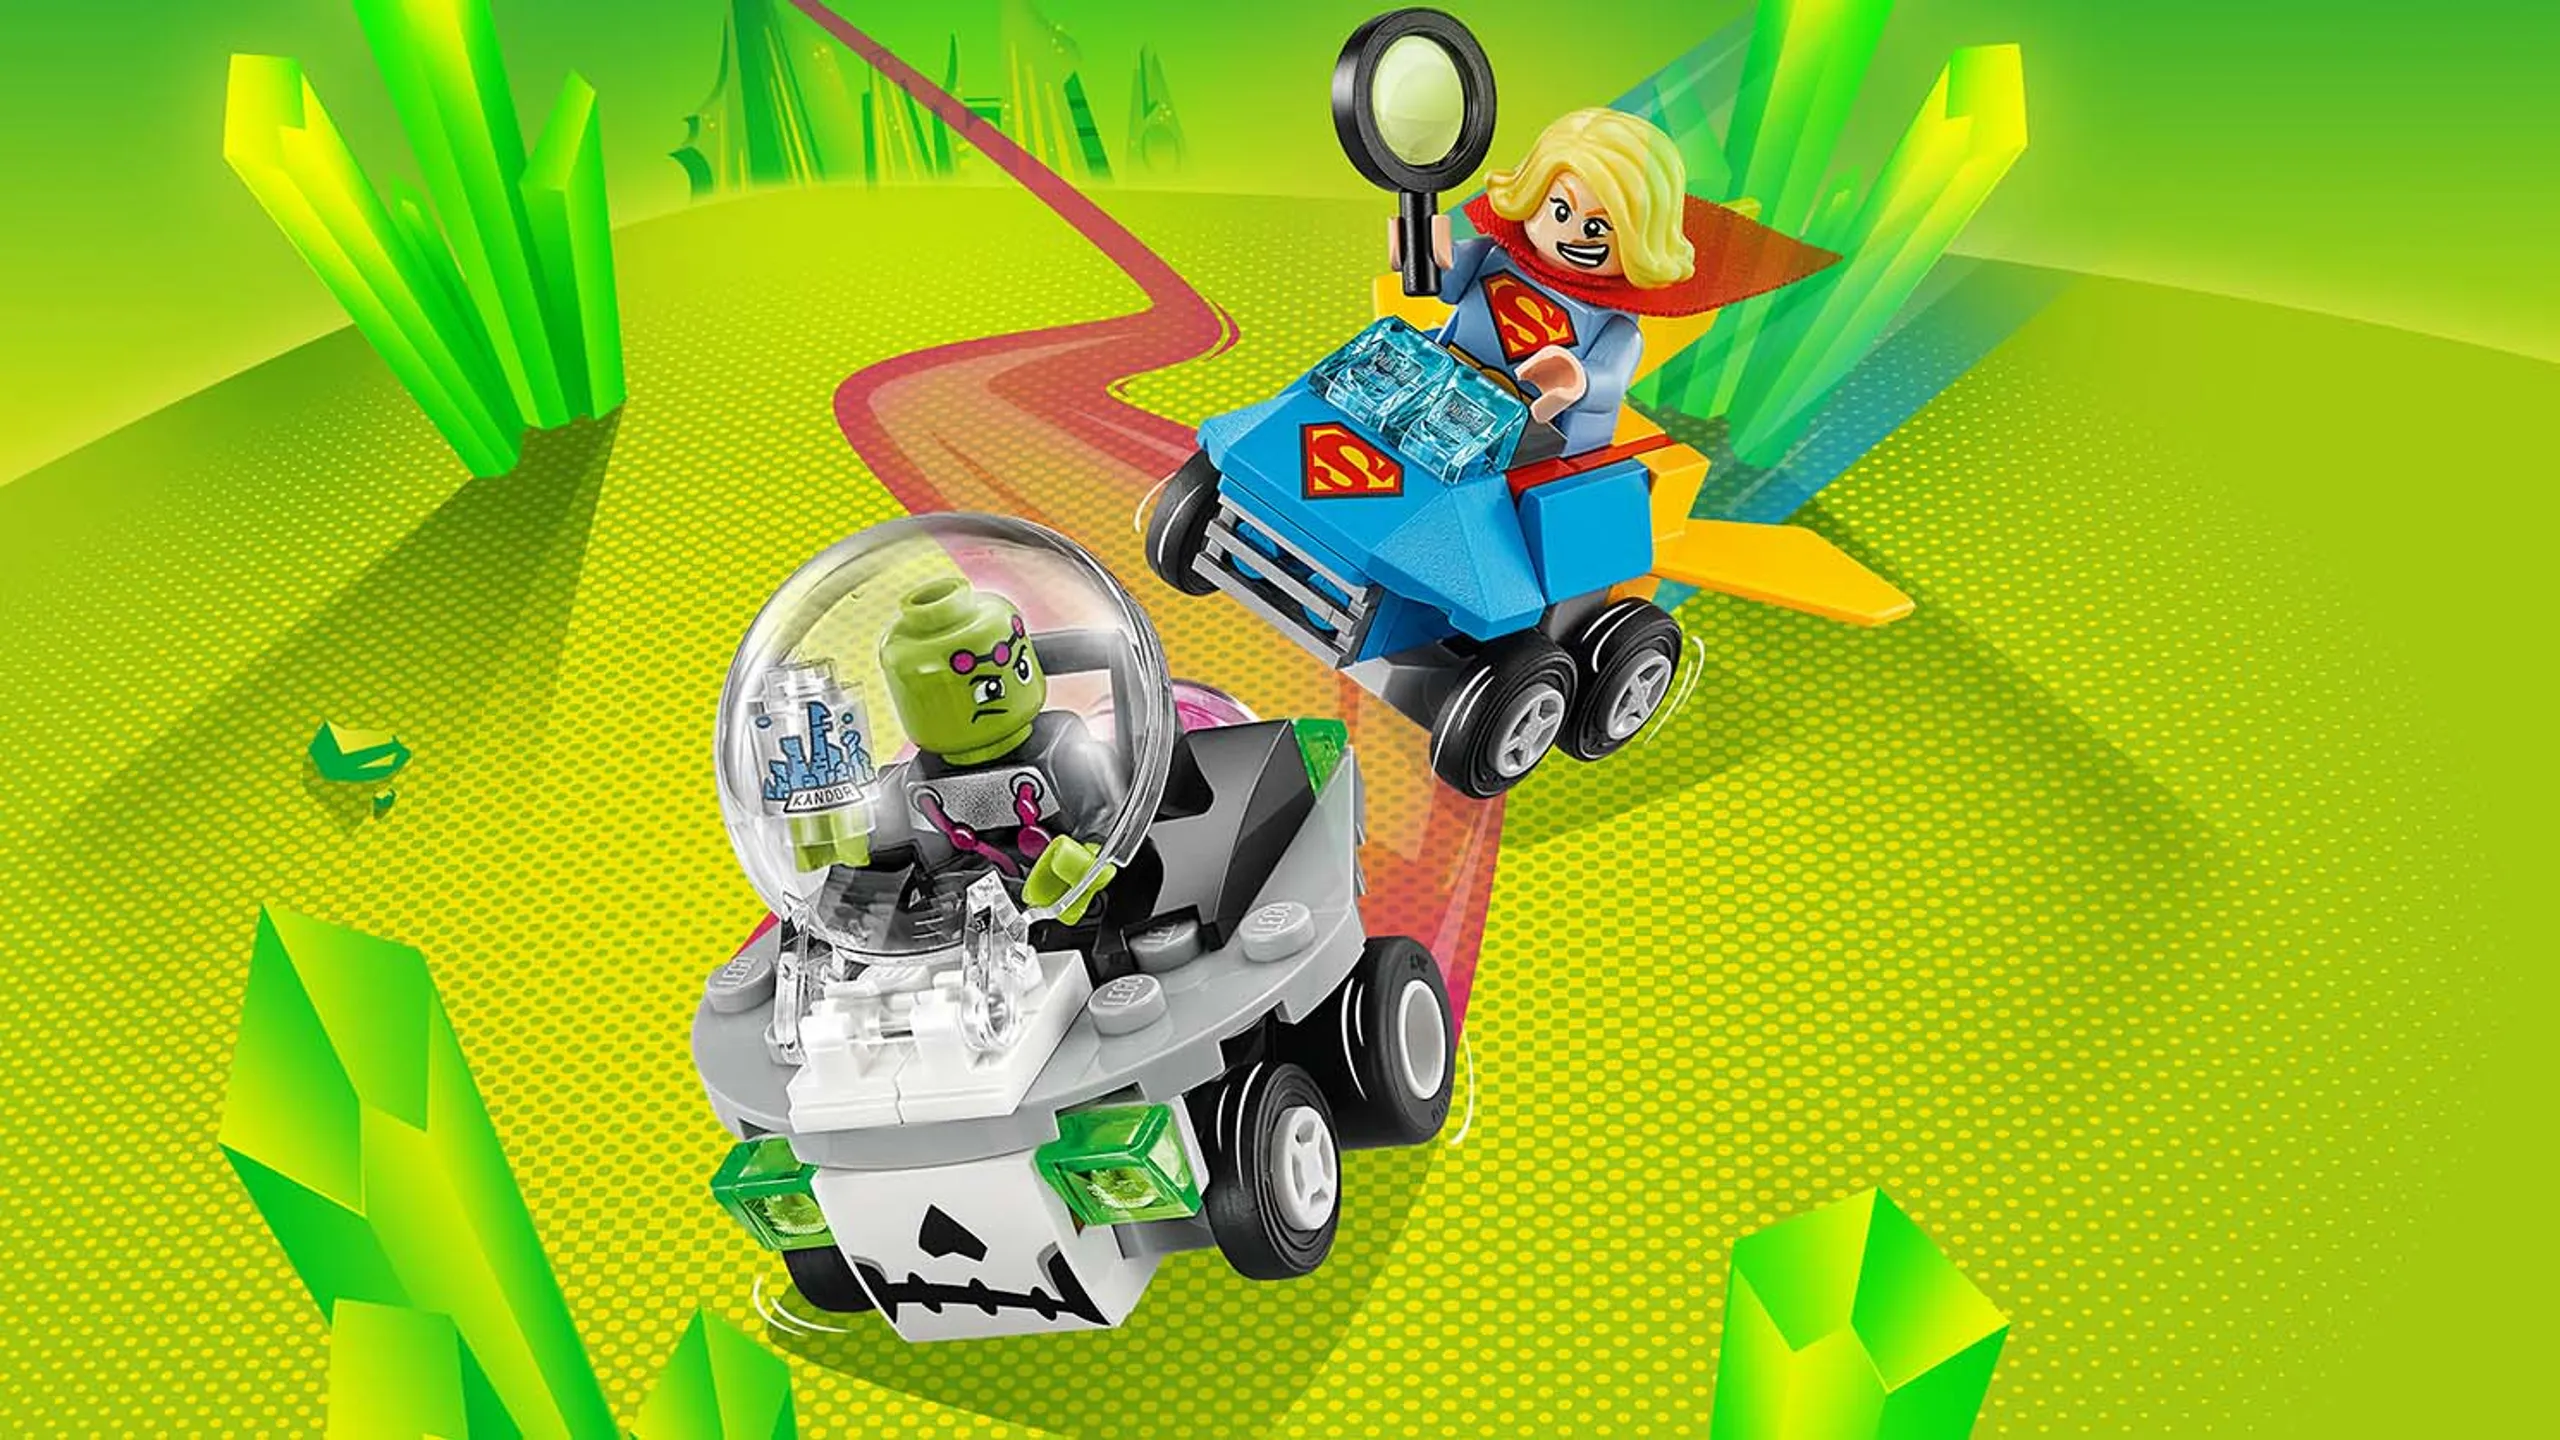 LEGO Super Heroes - 76094 Mighty Micros: Supergirl & Braniac - Jump into Supergirl’s rocket, take off and chase Brainiac’s UFO and take back the Bottle City of Kandor.